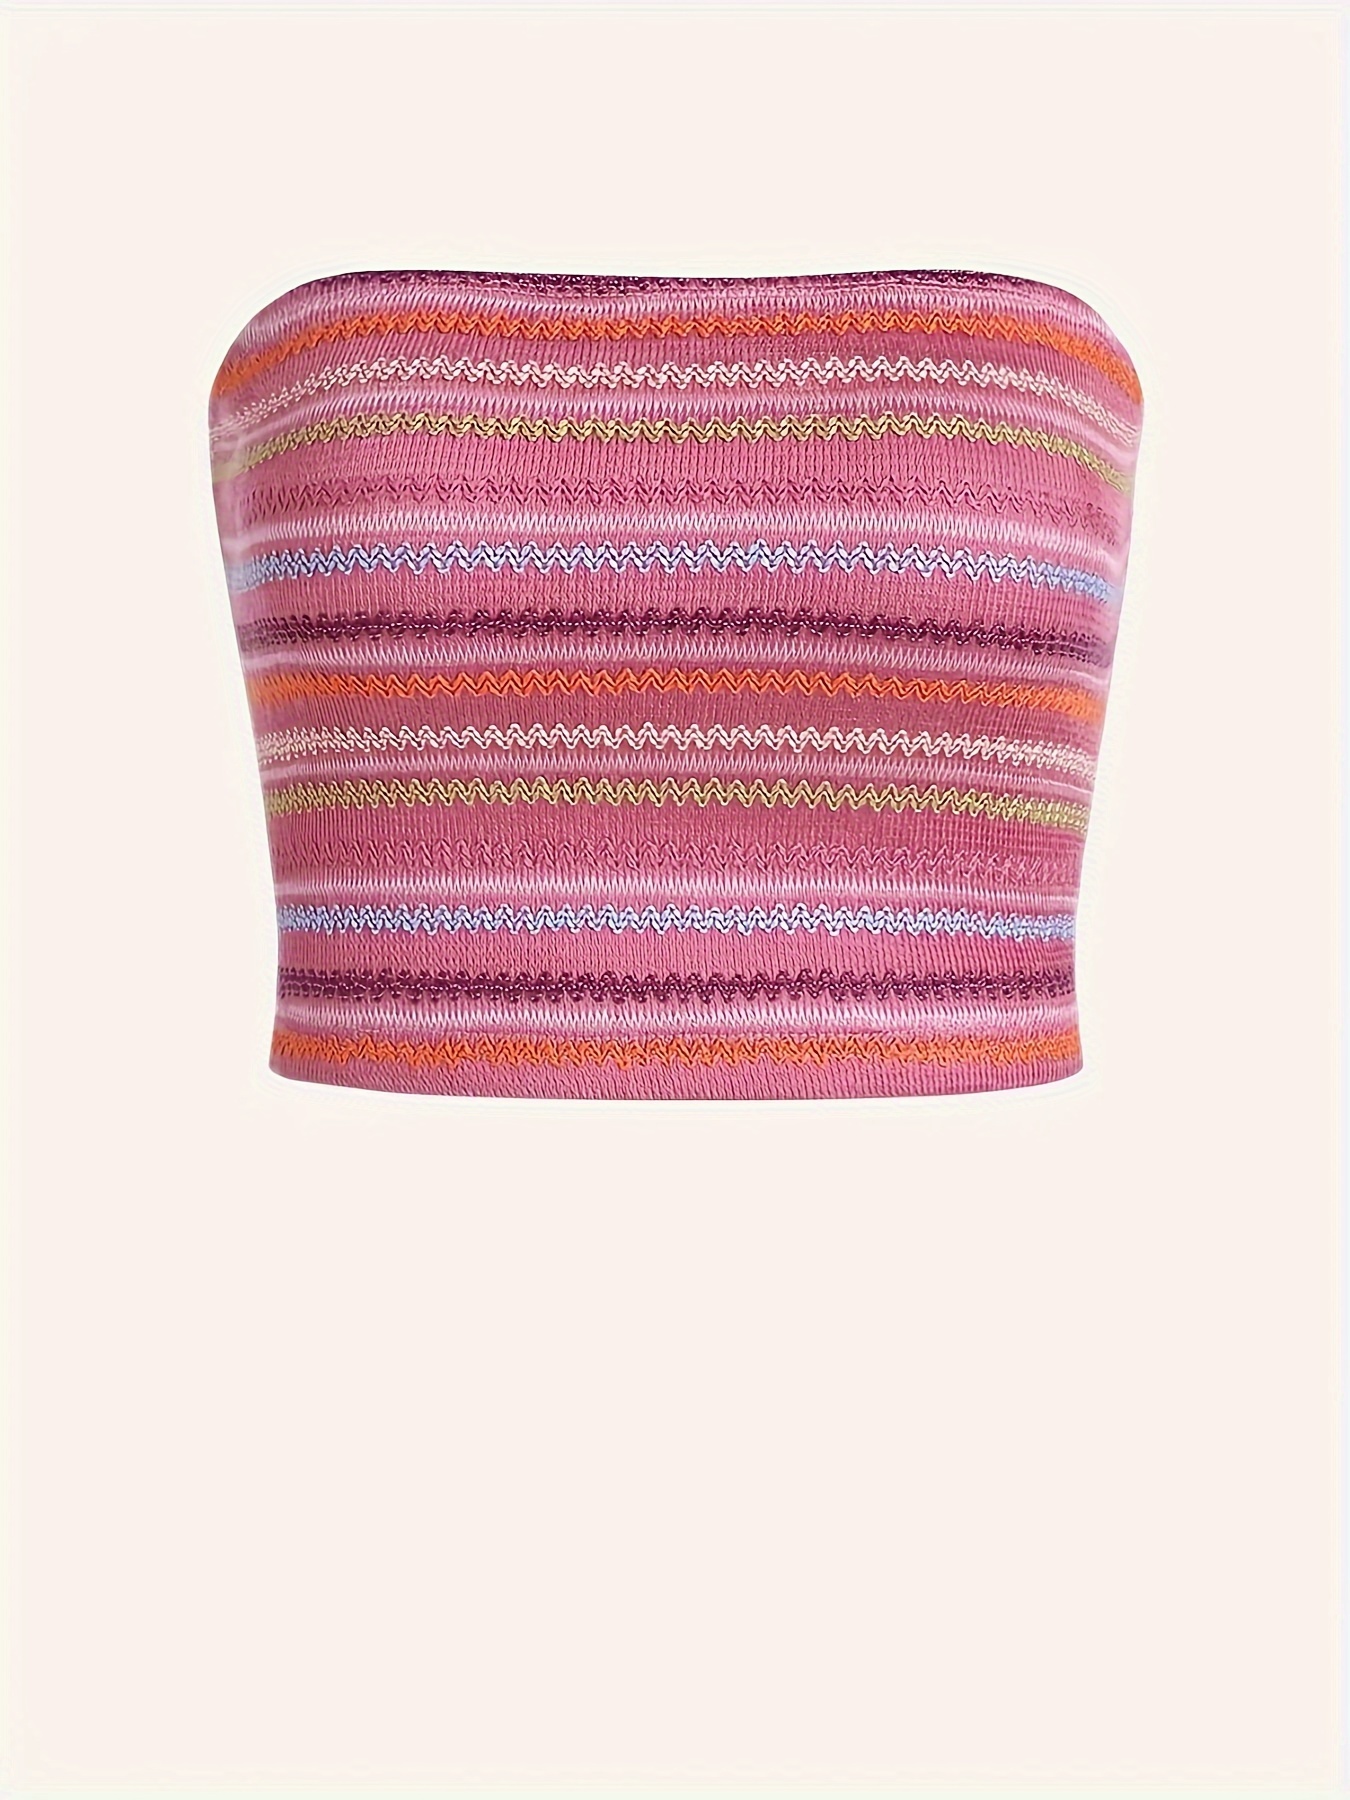 Striped Sleeveless Crop Tube Top, Casual Straight Neck Strapless Top For Summer, Women's Clothing